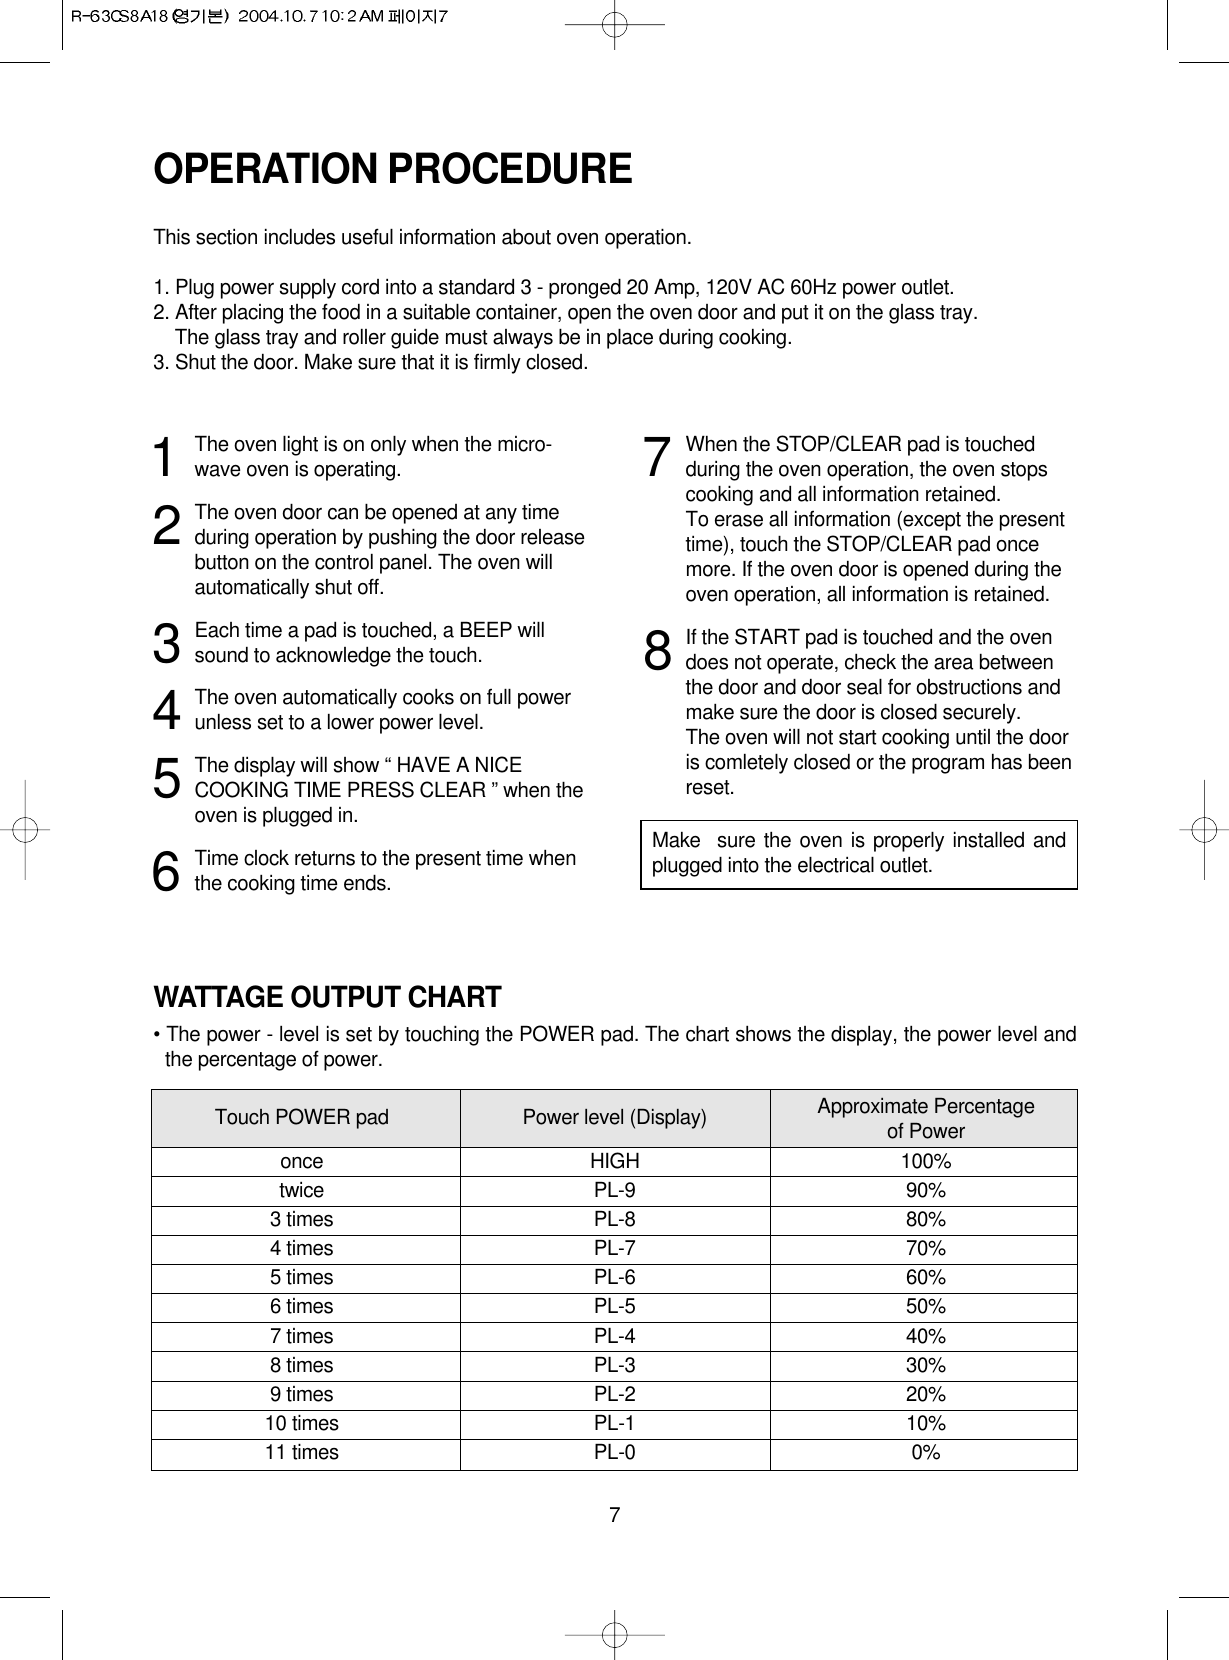 7WATTAGE OUTPUT CHART• The power - level is set by touching the POWER pad. The chart shows the display, the power level andthe percentage of power.OPERATION PROCEDUREThis section includes useful information about oven operation.1. Plug power supply cord into a standard 3 - pronged 20 Amp, 120V AC 60Hz power outlet.2. After placing the food in a suitable container, open the oven door and put it on the glass tray.2. The glass tray and roller guide must always be in place during cooking.3. Shut the door. Make sure that it is firmly closed.1The oven light is on only when the micro-wave oven is operating.2The oven door can be opened at any timeduring operation by pushing the door releasebutton on the control panel. The oven willautomatically shut off.3Each time a pad is touched, a BEEP willsound to acknowledge the touch.4The oven automatically cooks on full powerunless set to a lower power level.5The display will show “ HAVE A NICECOOKING TIME PRESS CLEAR ” when theoven is plugged in.6Time clock returns to the present time whenthe cooking time ends.7When the STOP/CLEAR pad is touchedduring the oven operation, the oven stopscooking and all information retained.To erase all information (except the presenttime), touch the STOP/CLEAR pad oncemore. If the oven door is opened during theoven operation, all information is retained.8If the START pad is touched and the ovendoes not operate, check the area betweenthe door and door seal for obstructions andmake sure the door is closed securely.The oven will not start cooking until the dooris comletely closed or the program has beenreset.Make  sure the oven is properly installed andplugged into the electrical outlet.Touch POWER pad Power level (Display) Approximate Percentageof Poweronce HIGH 100%twice PL-9 90%3 times PL-8 80%4 times PL-7 70%5 times PL-6 60%6 times PL-5 50%7 times PL-4 40%8 times PL-3 30%9 times PL-2 20%10 times PL-1 10%11 times PL-0 0%